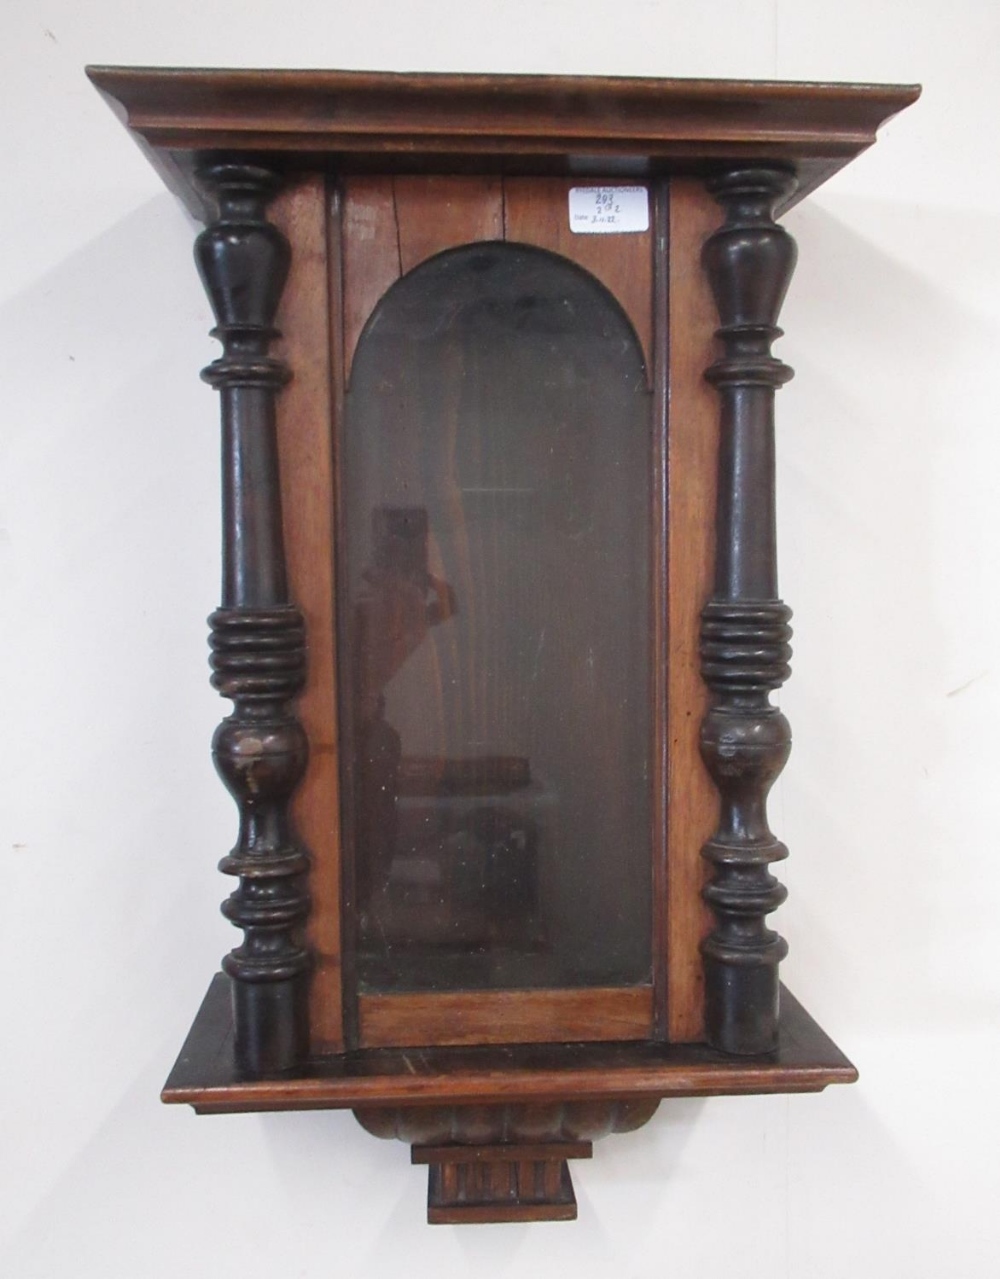 Early C20th oak cased wall clock, with glazed panelled door, W34cm D18cm H76cm, late C19th walnut - Image 2 of 2